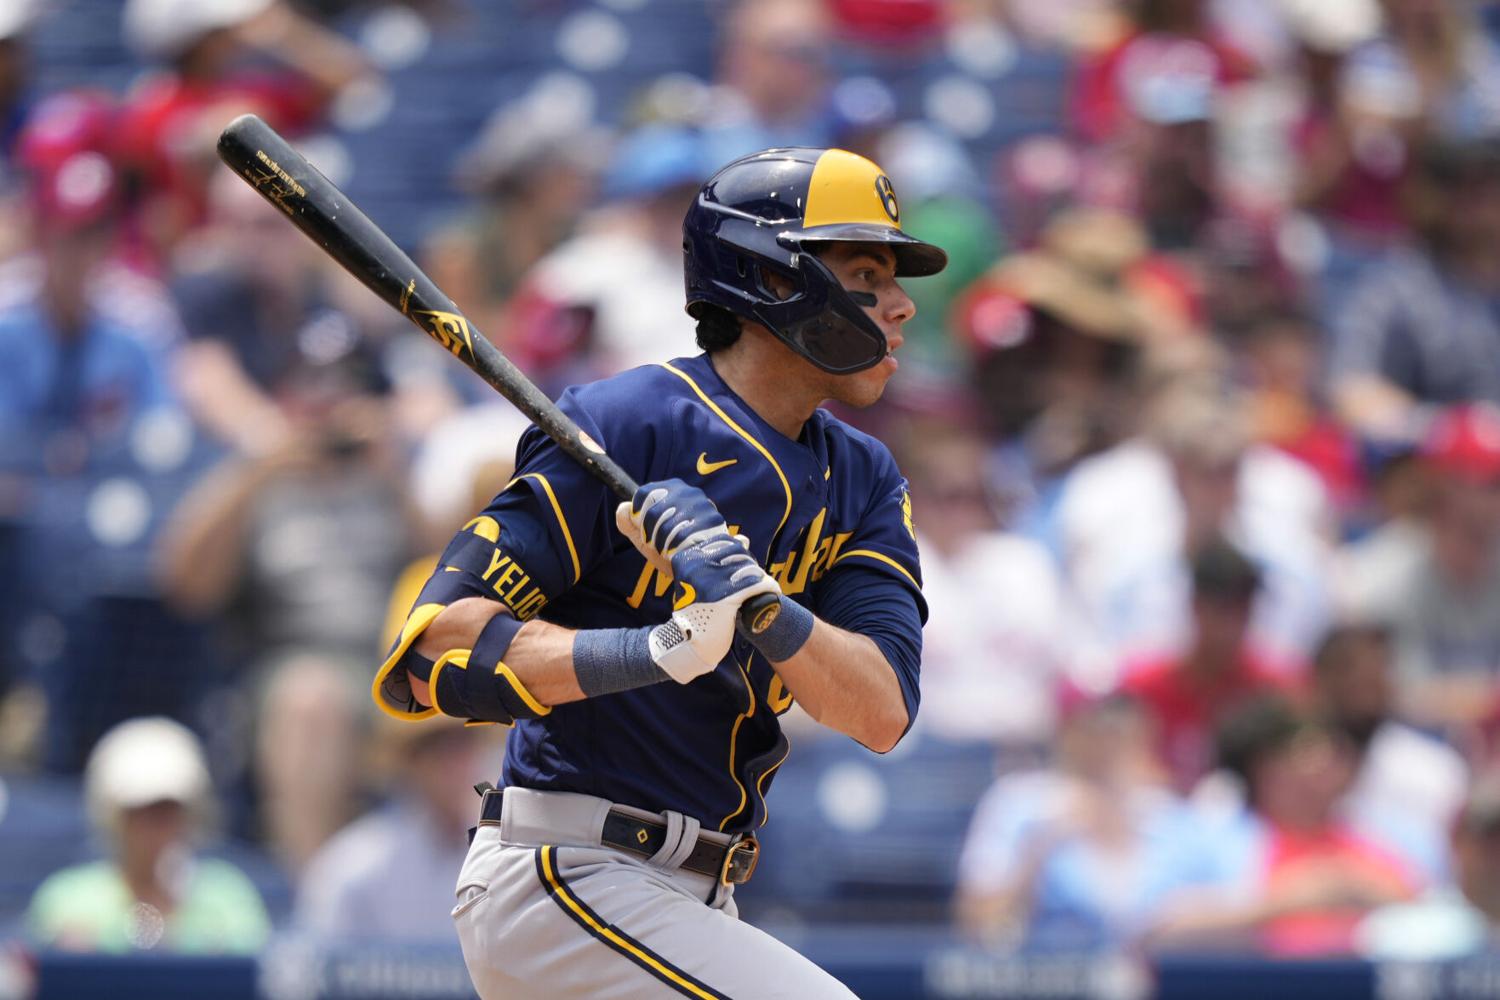 Aledmys Diaz's clutch hit sends A's past Brewers in 10